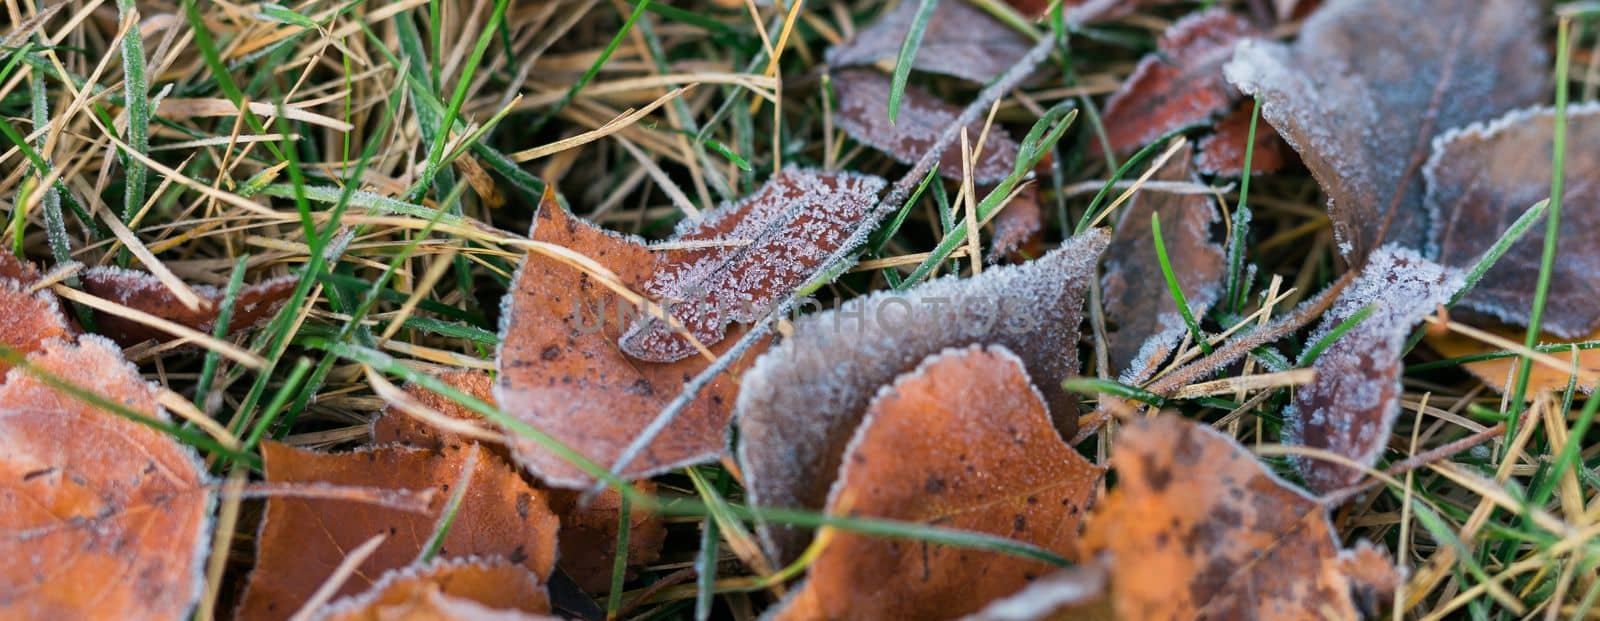 Banner frost on fallen leaves in late autumn or early winter, frost on grass at first frost - cold season concept copy space and empty place for text by Satura86